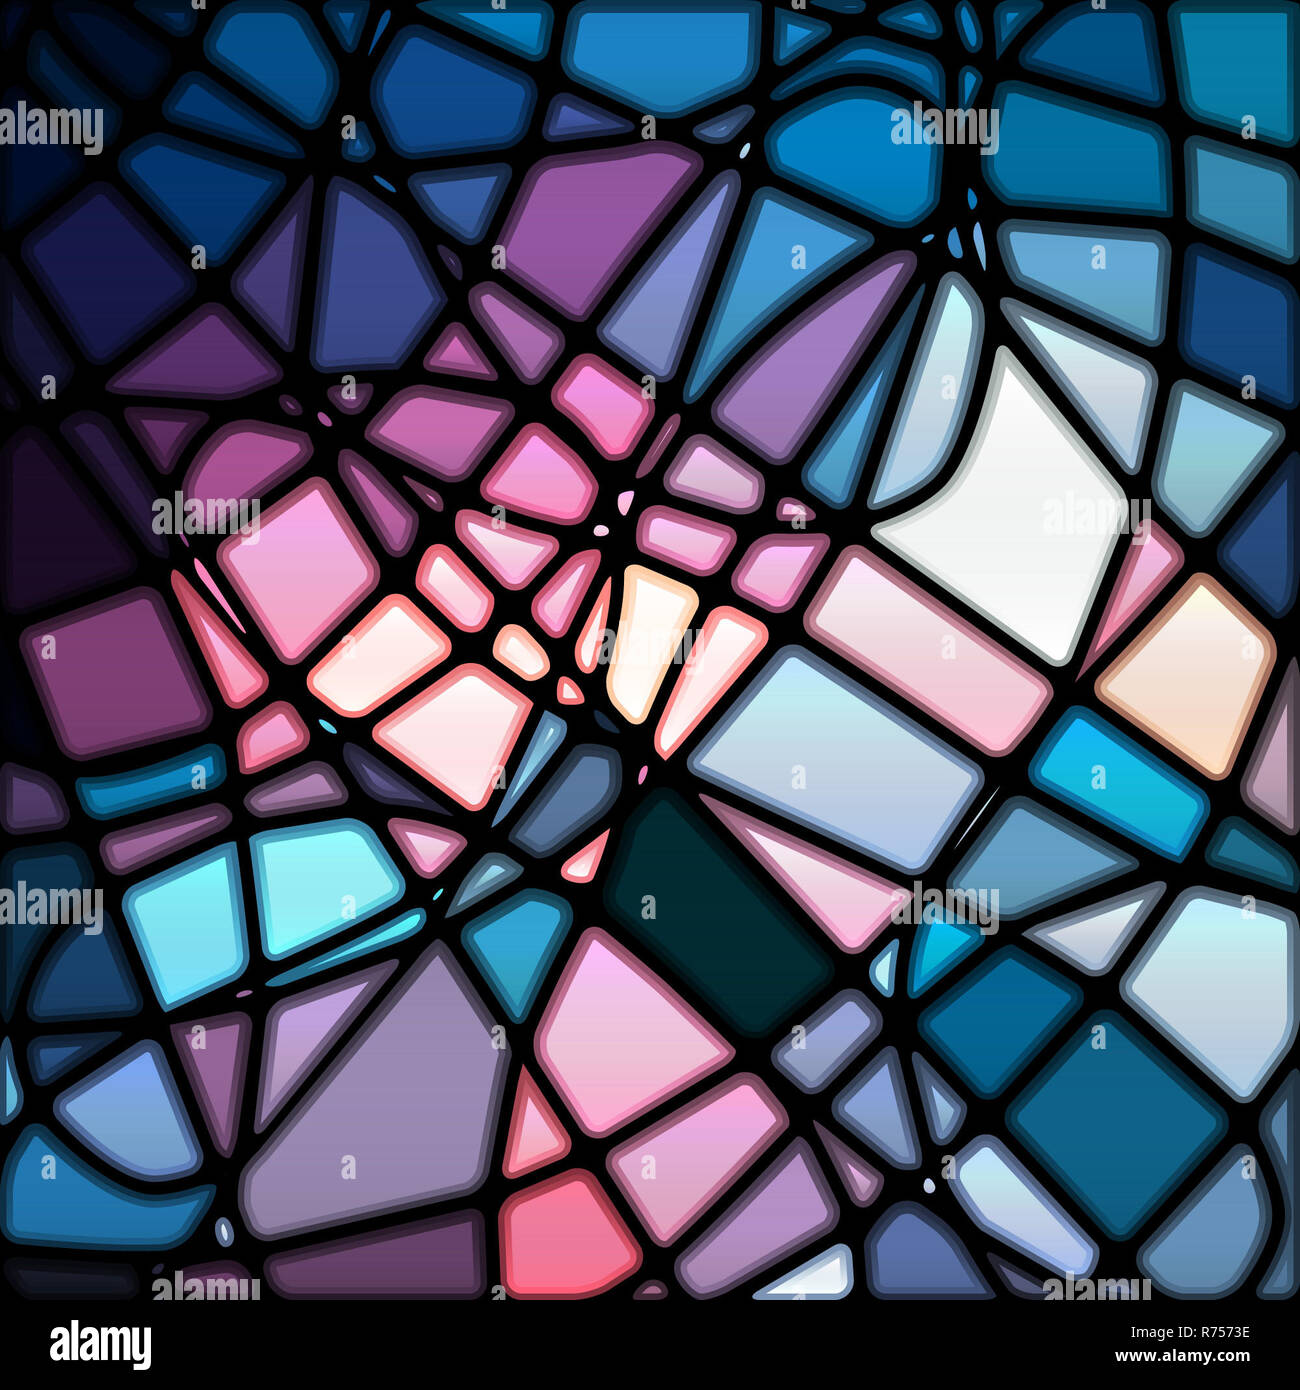 Abstract stained-glass mosaic background Vector Image